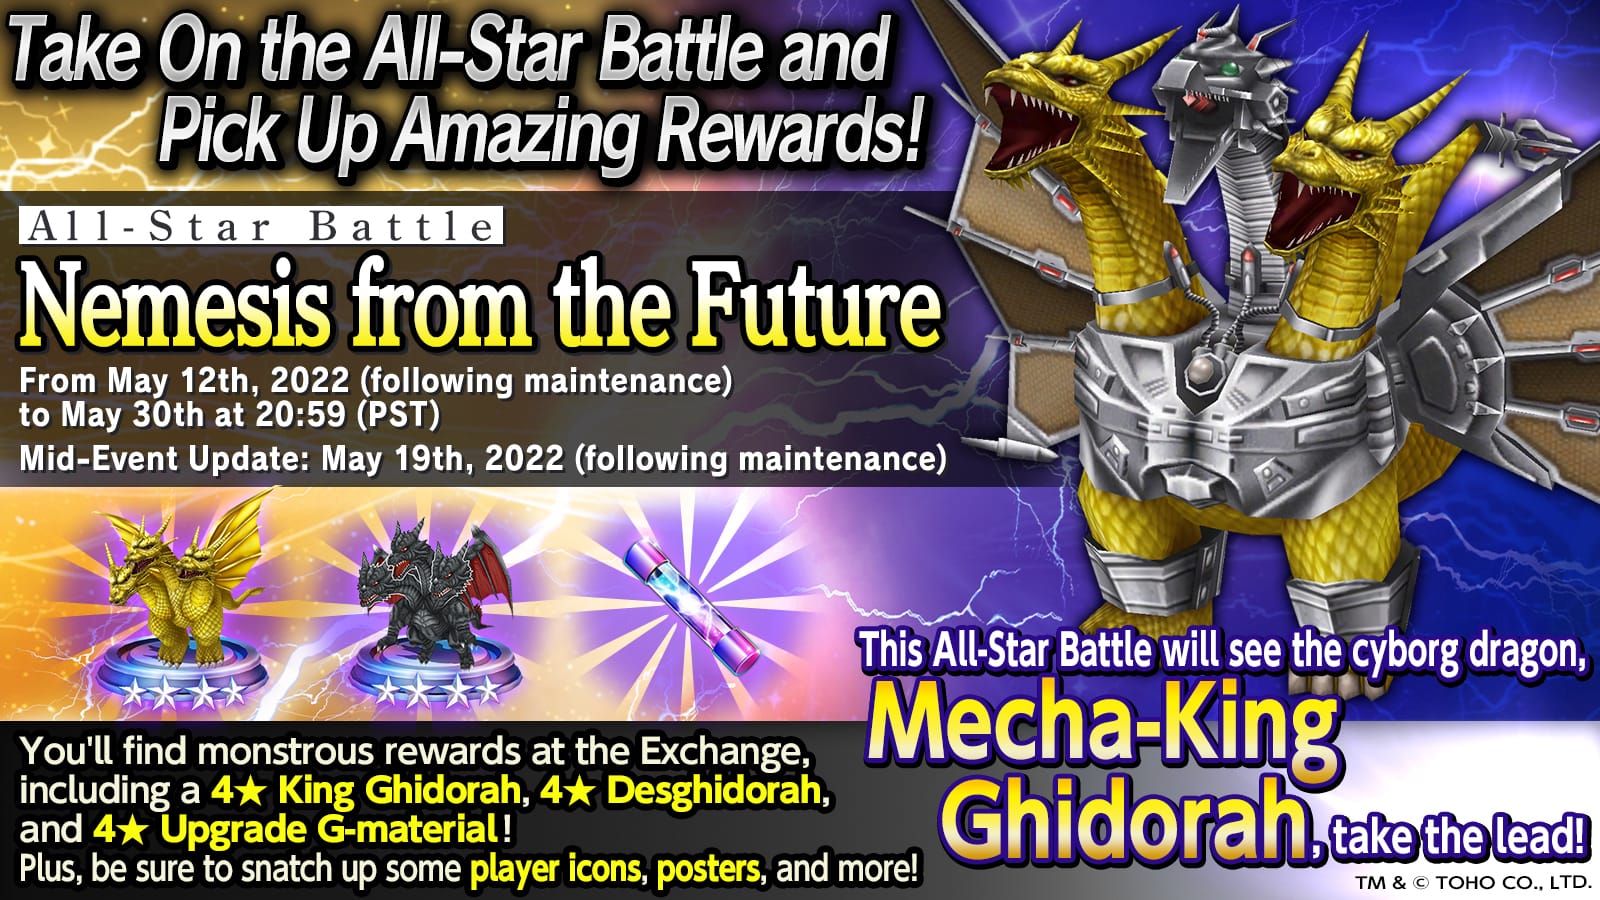 Take On the All-Star Battle and Pick Up Amazing Rewards! All-Star Battle Nemesis from the Future